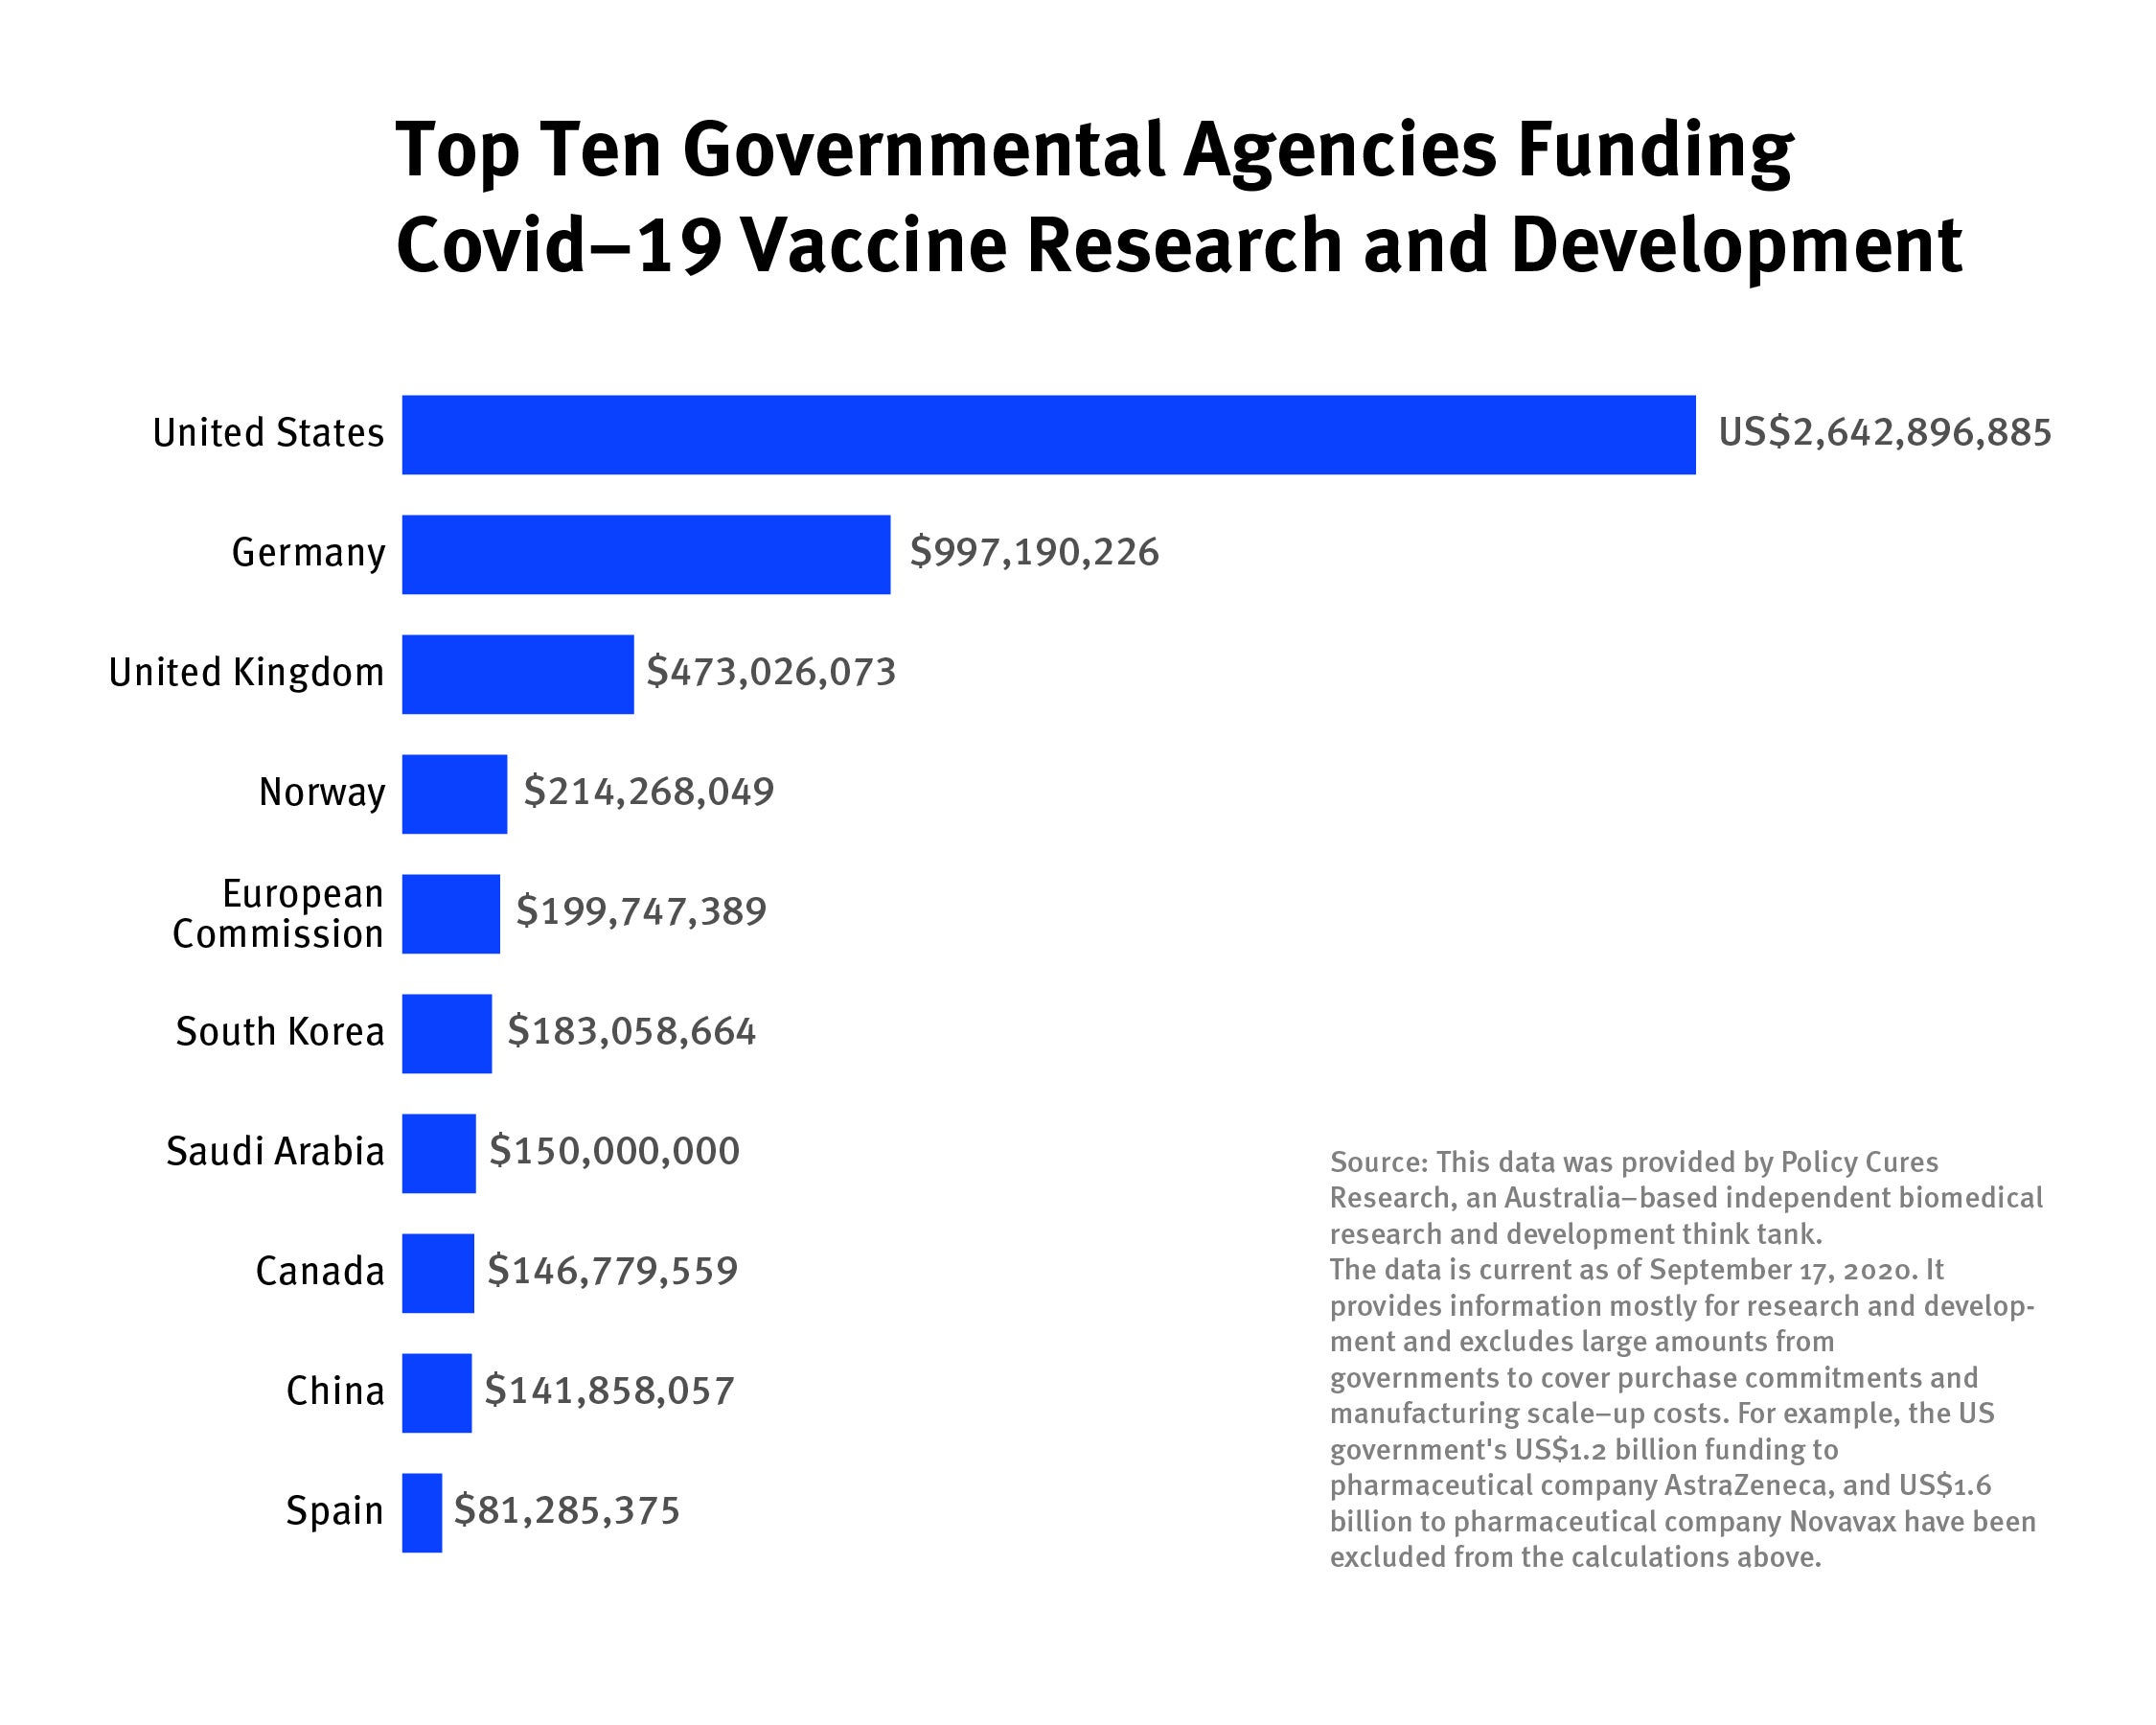 A blue bar graph comparing the amount of funding the top 10 Governmental Agencies have contributed towards Covid-19 vaccine research and development